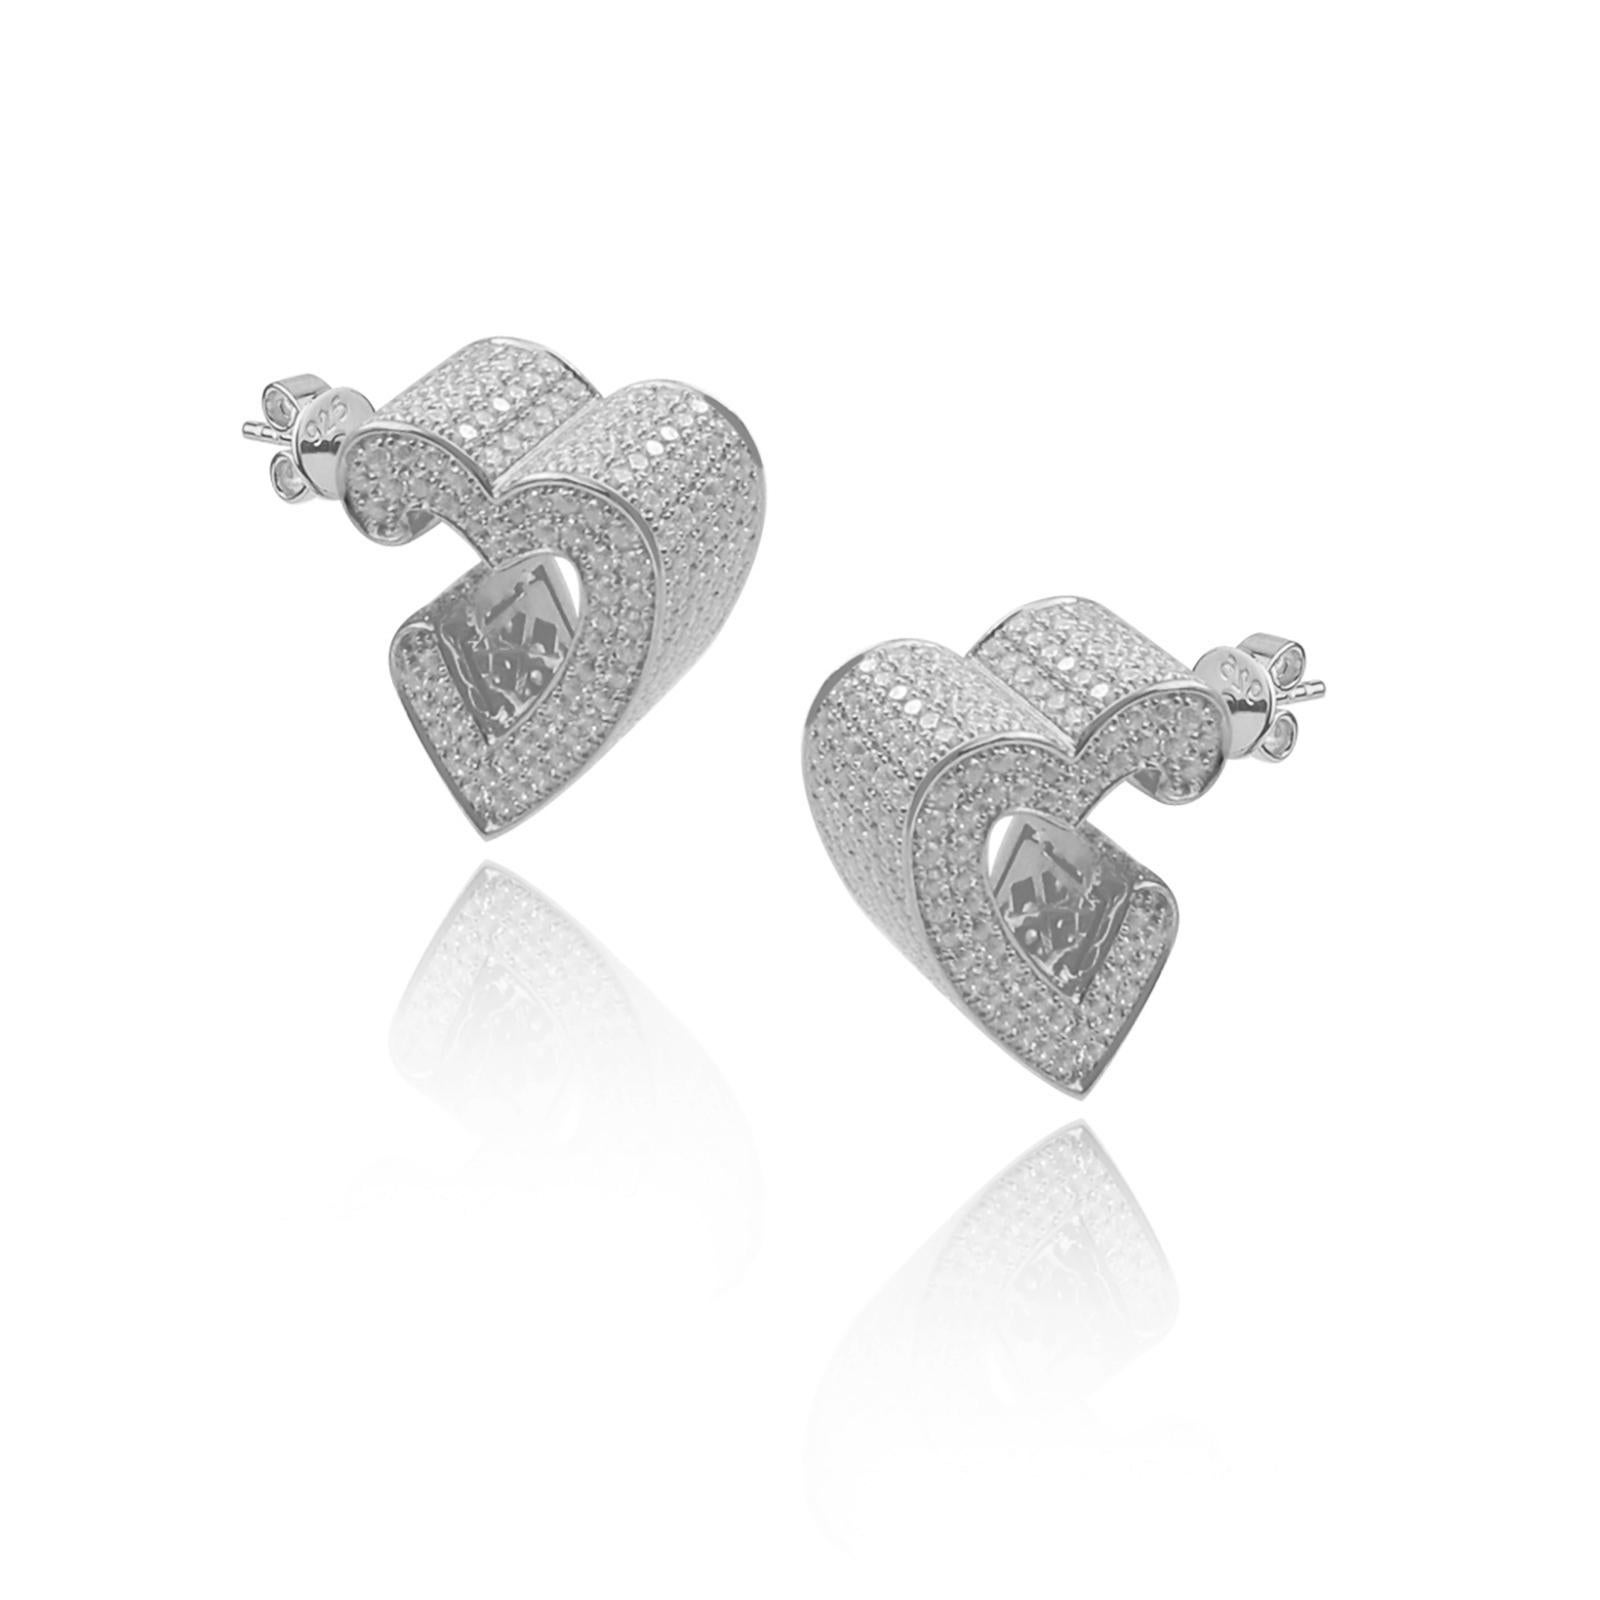 When it comes to self-expression, the style possibilities are endless. These 3D heart pave earrings are the perfect complement to your look, day or night . The 3D effect lets your inner heart stand out in the crowd, and bling more vibrantly with